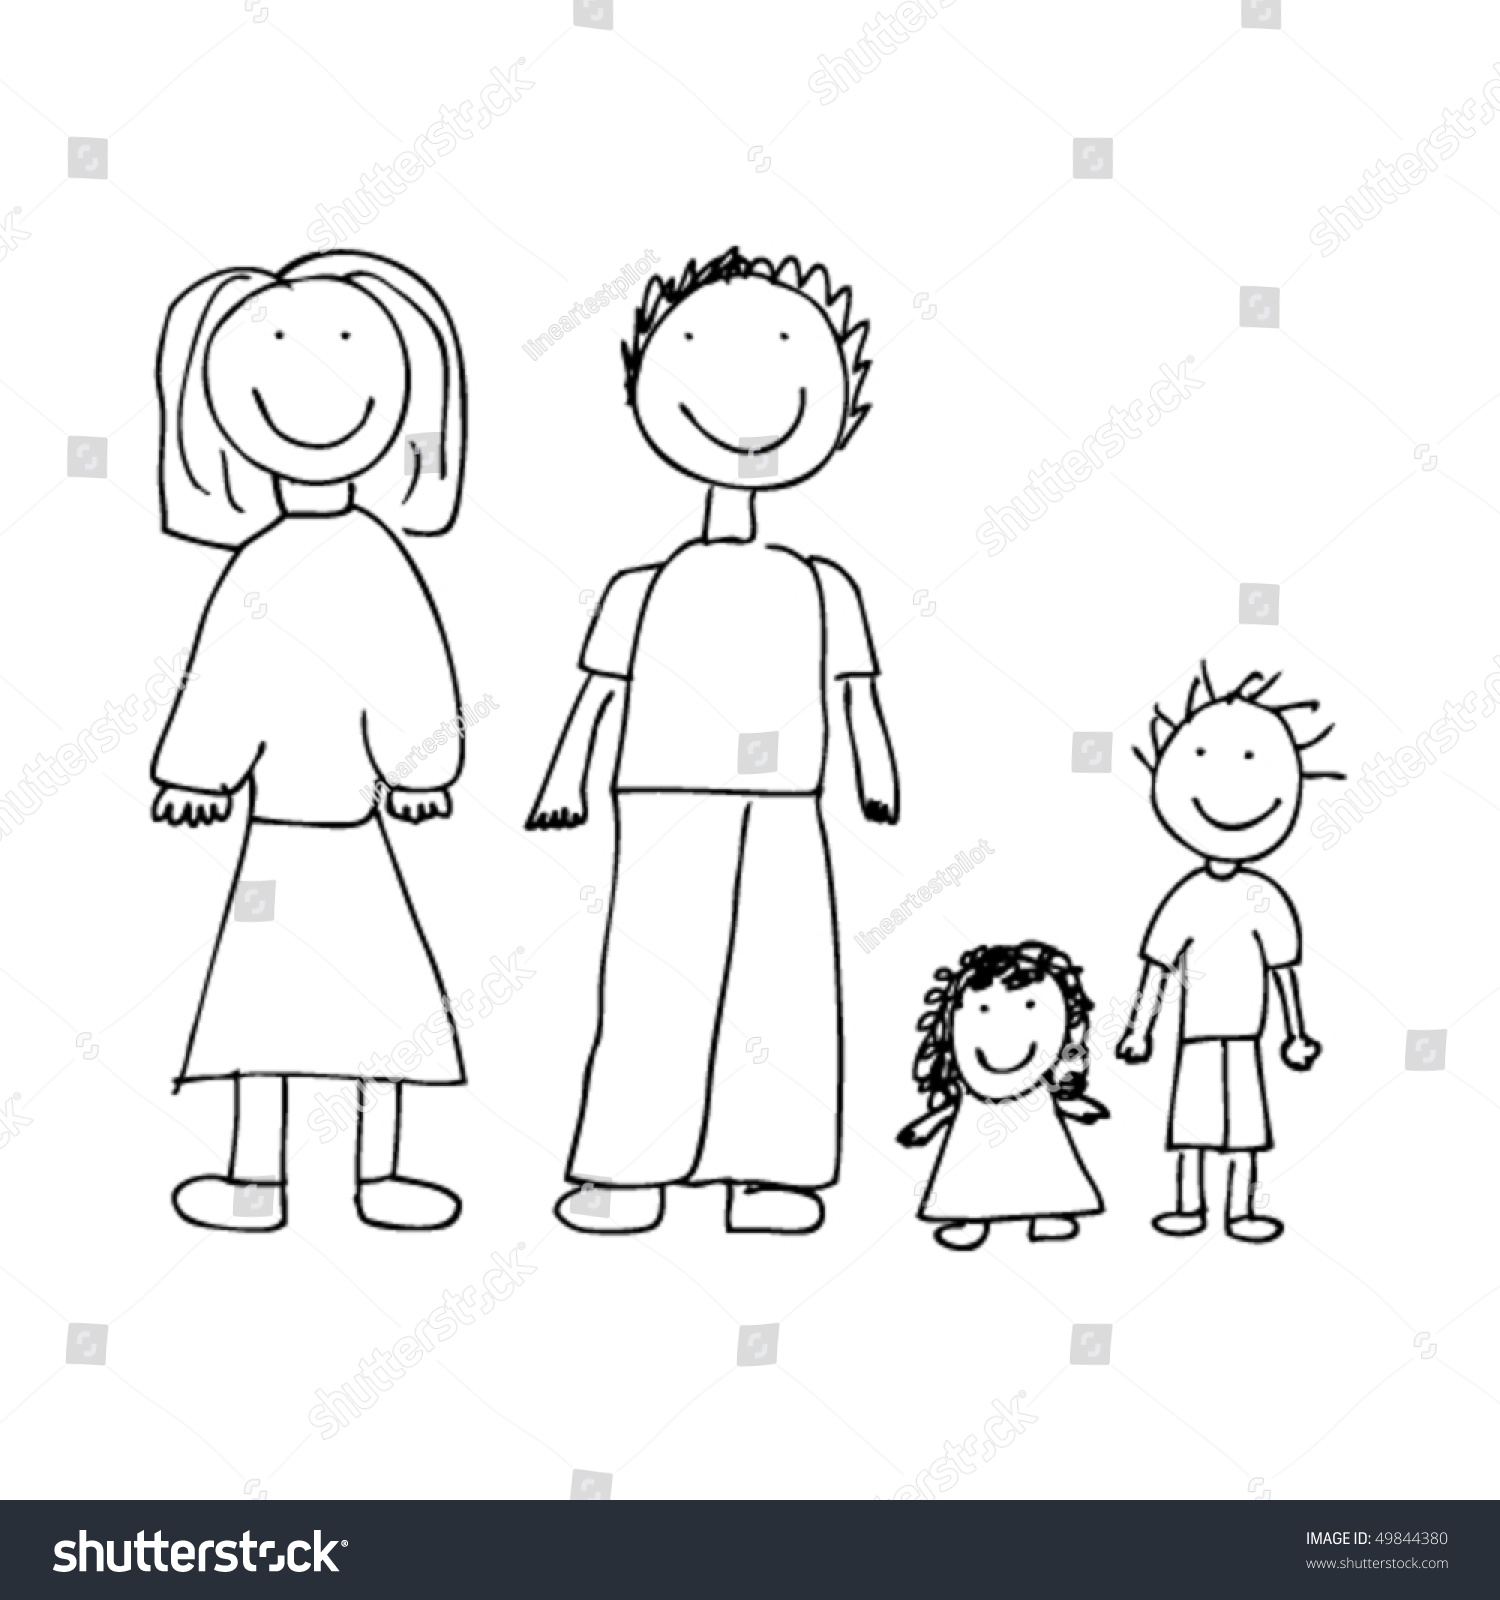 Child'S Drawing Of A Family Stock Vector Illustration 49844380